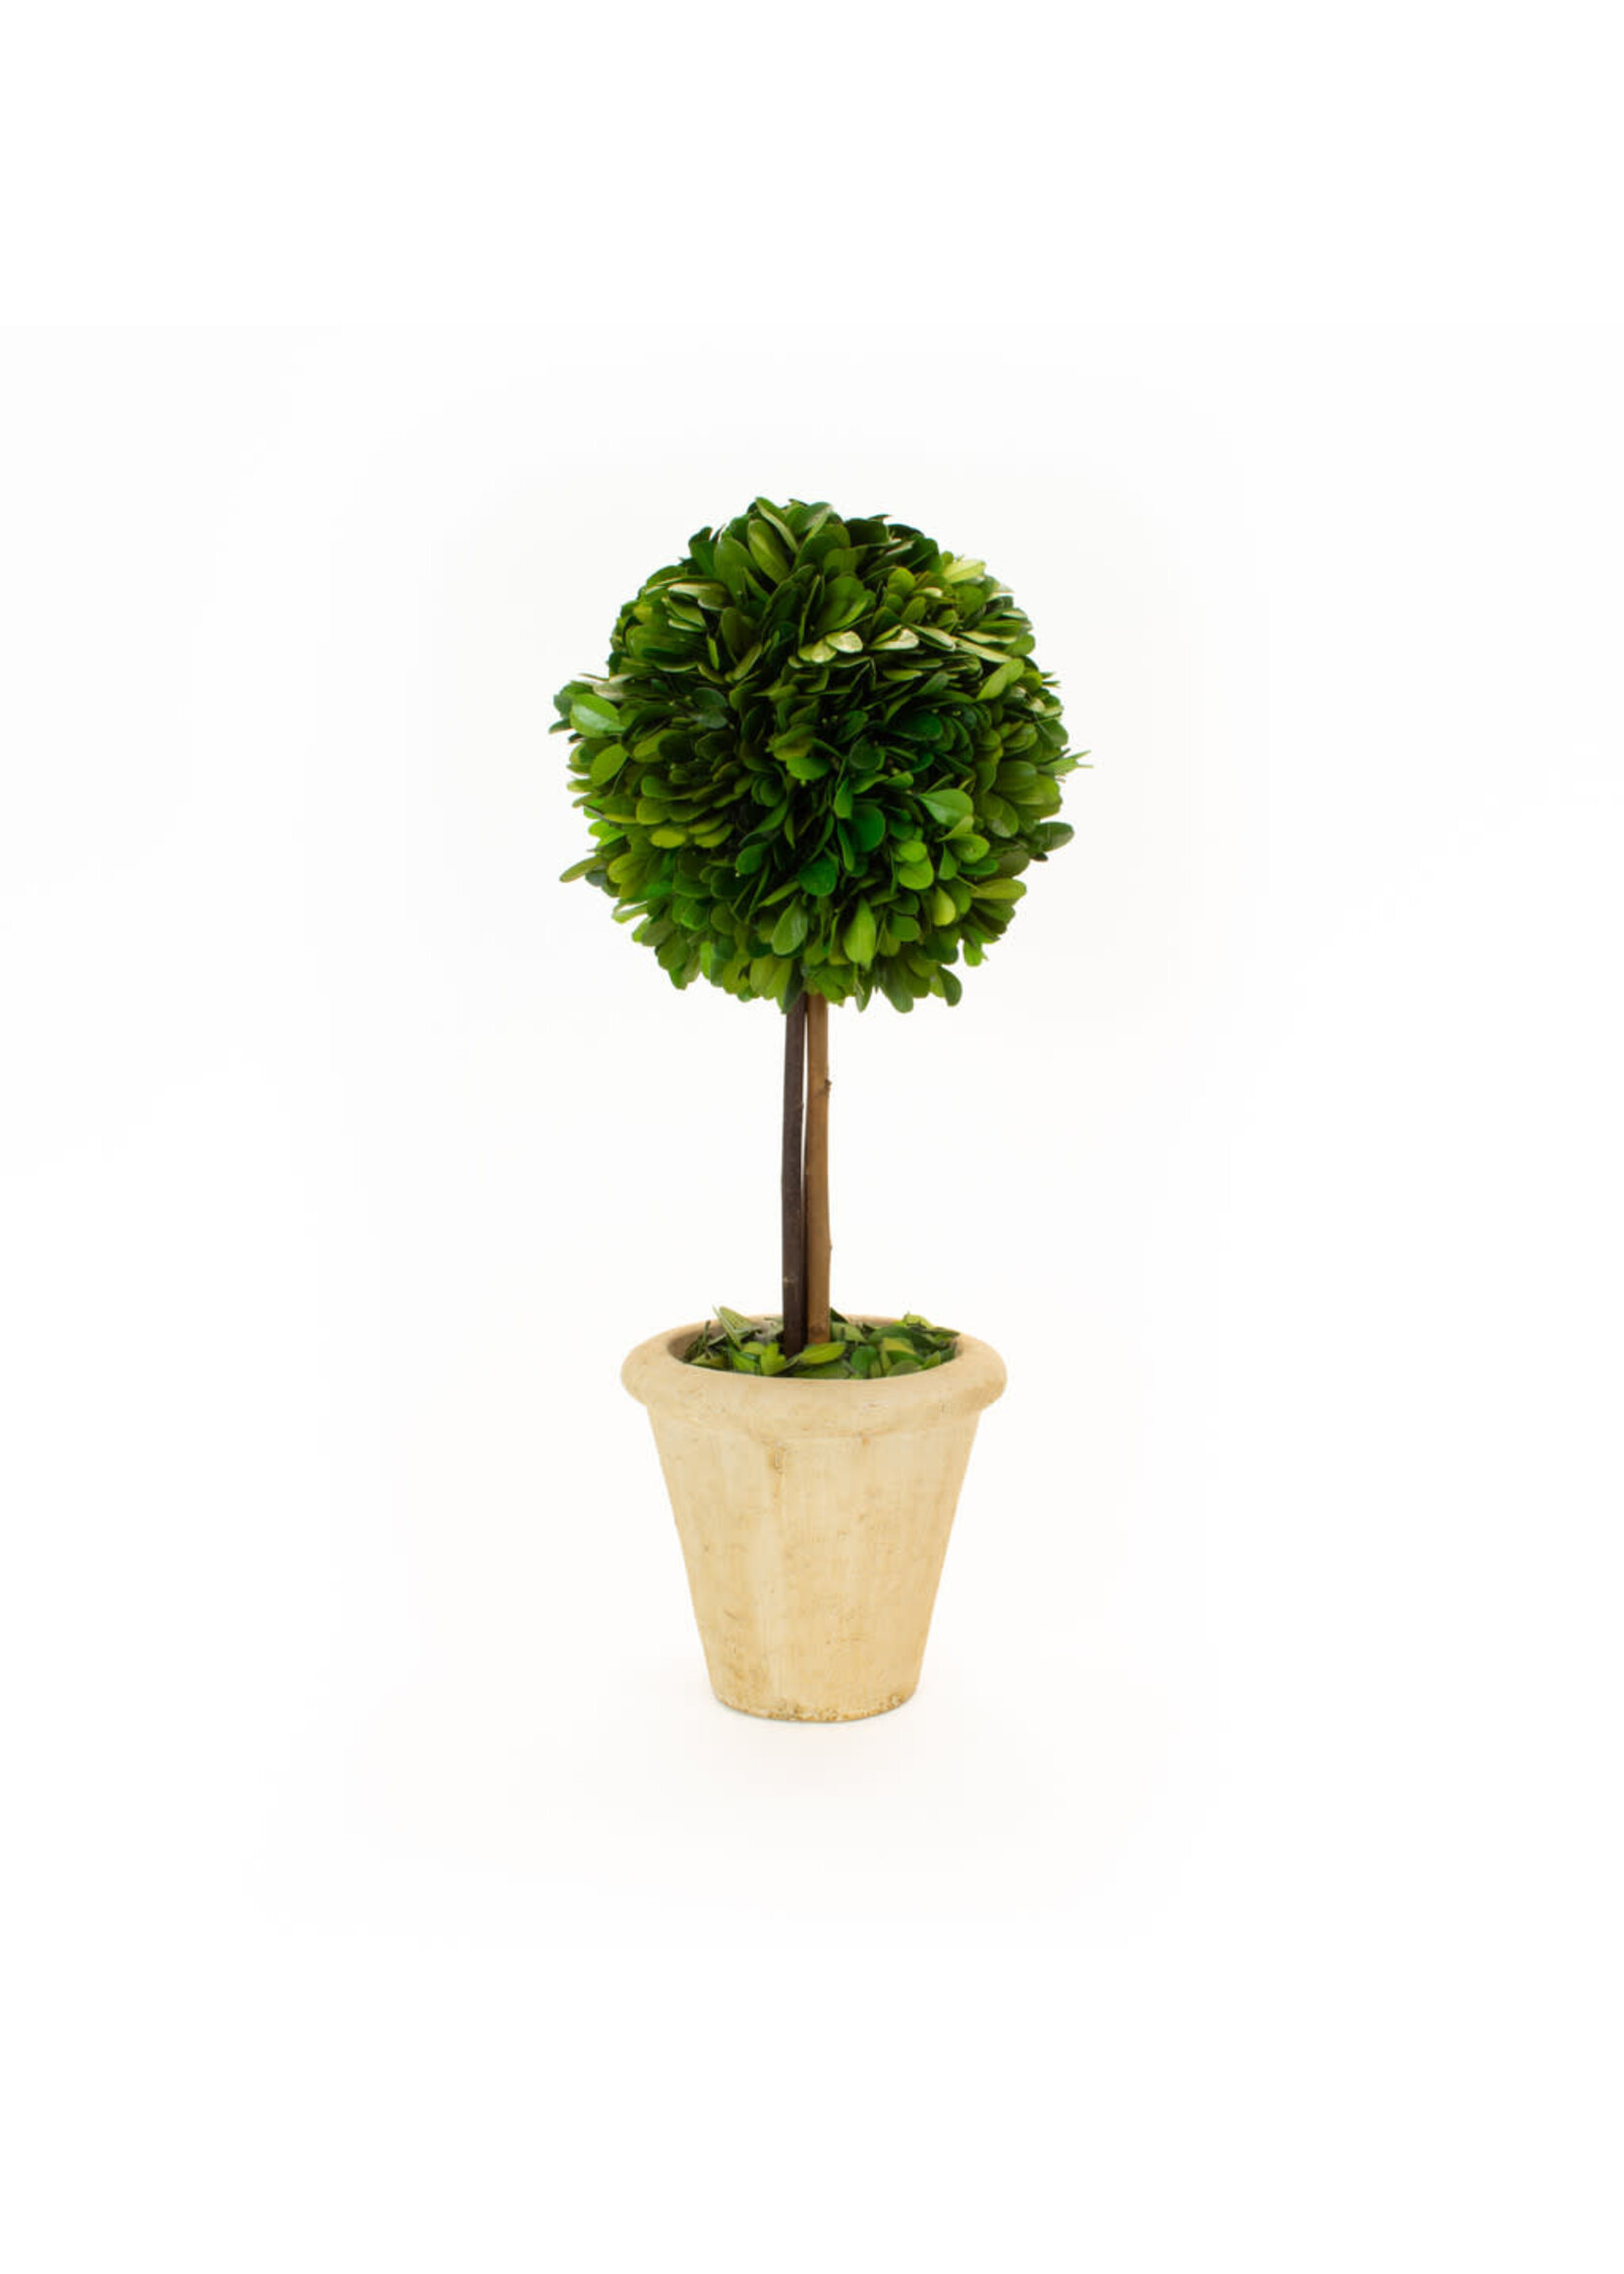 Mills Floral Company Boxwood Topiary - Preserved Single Ball Tree 16"